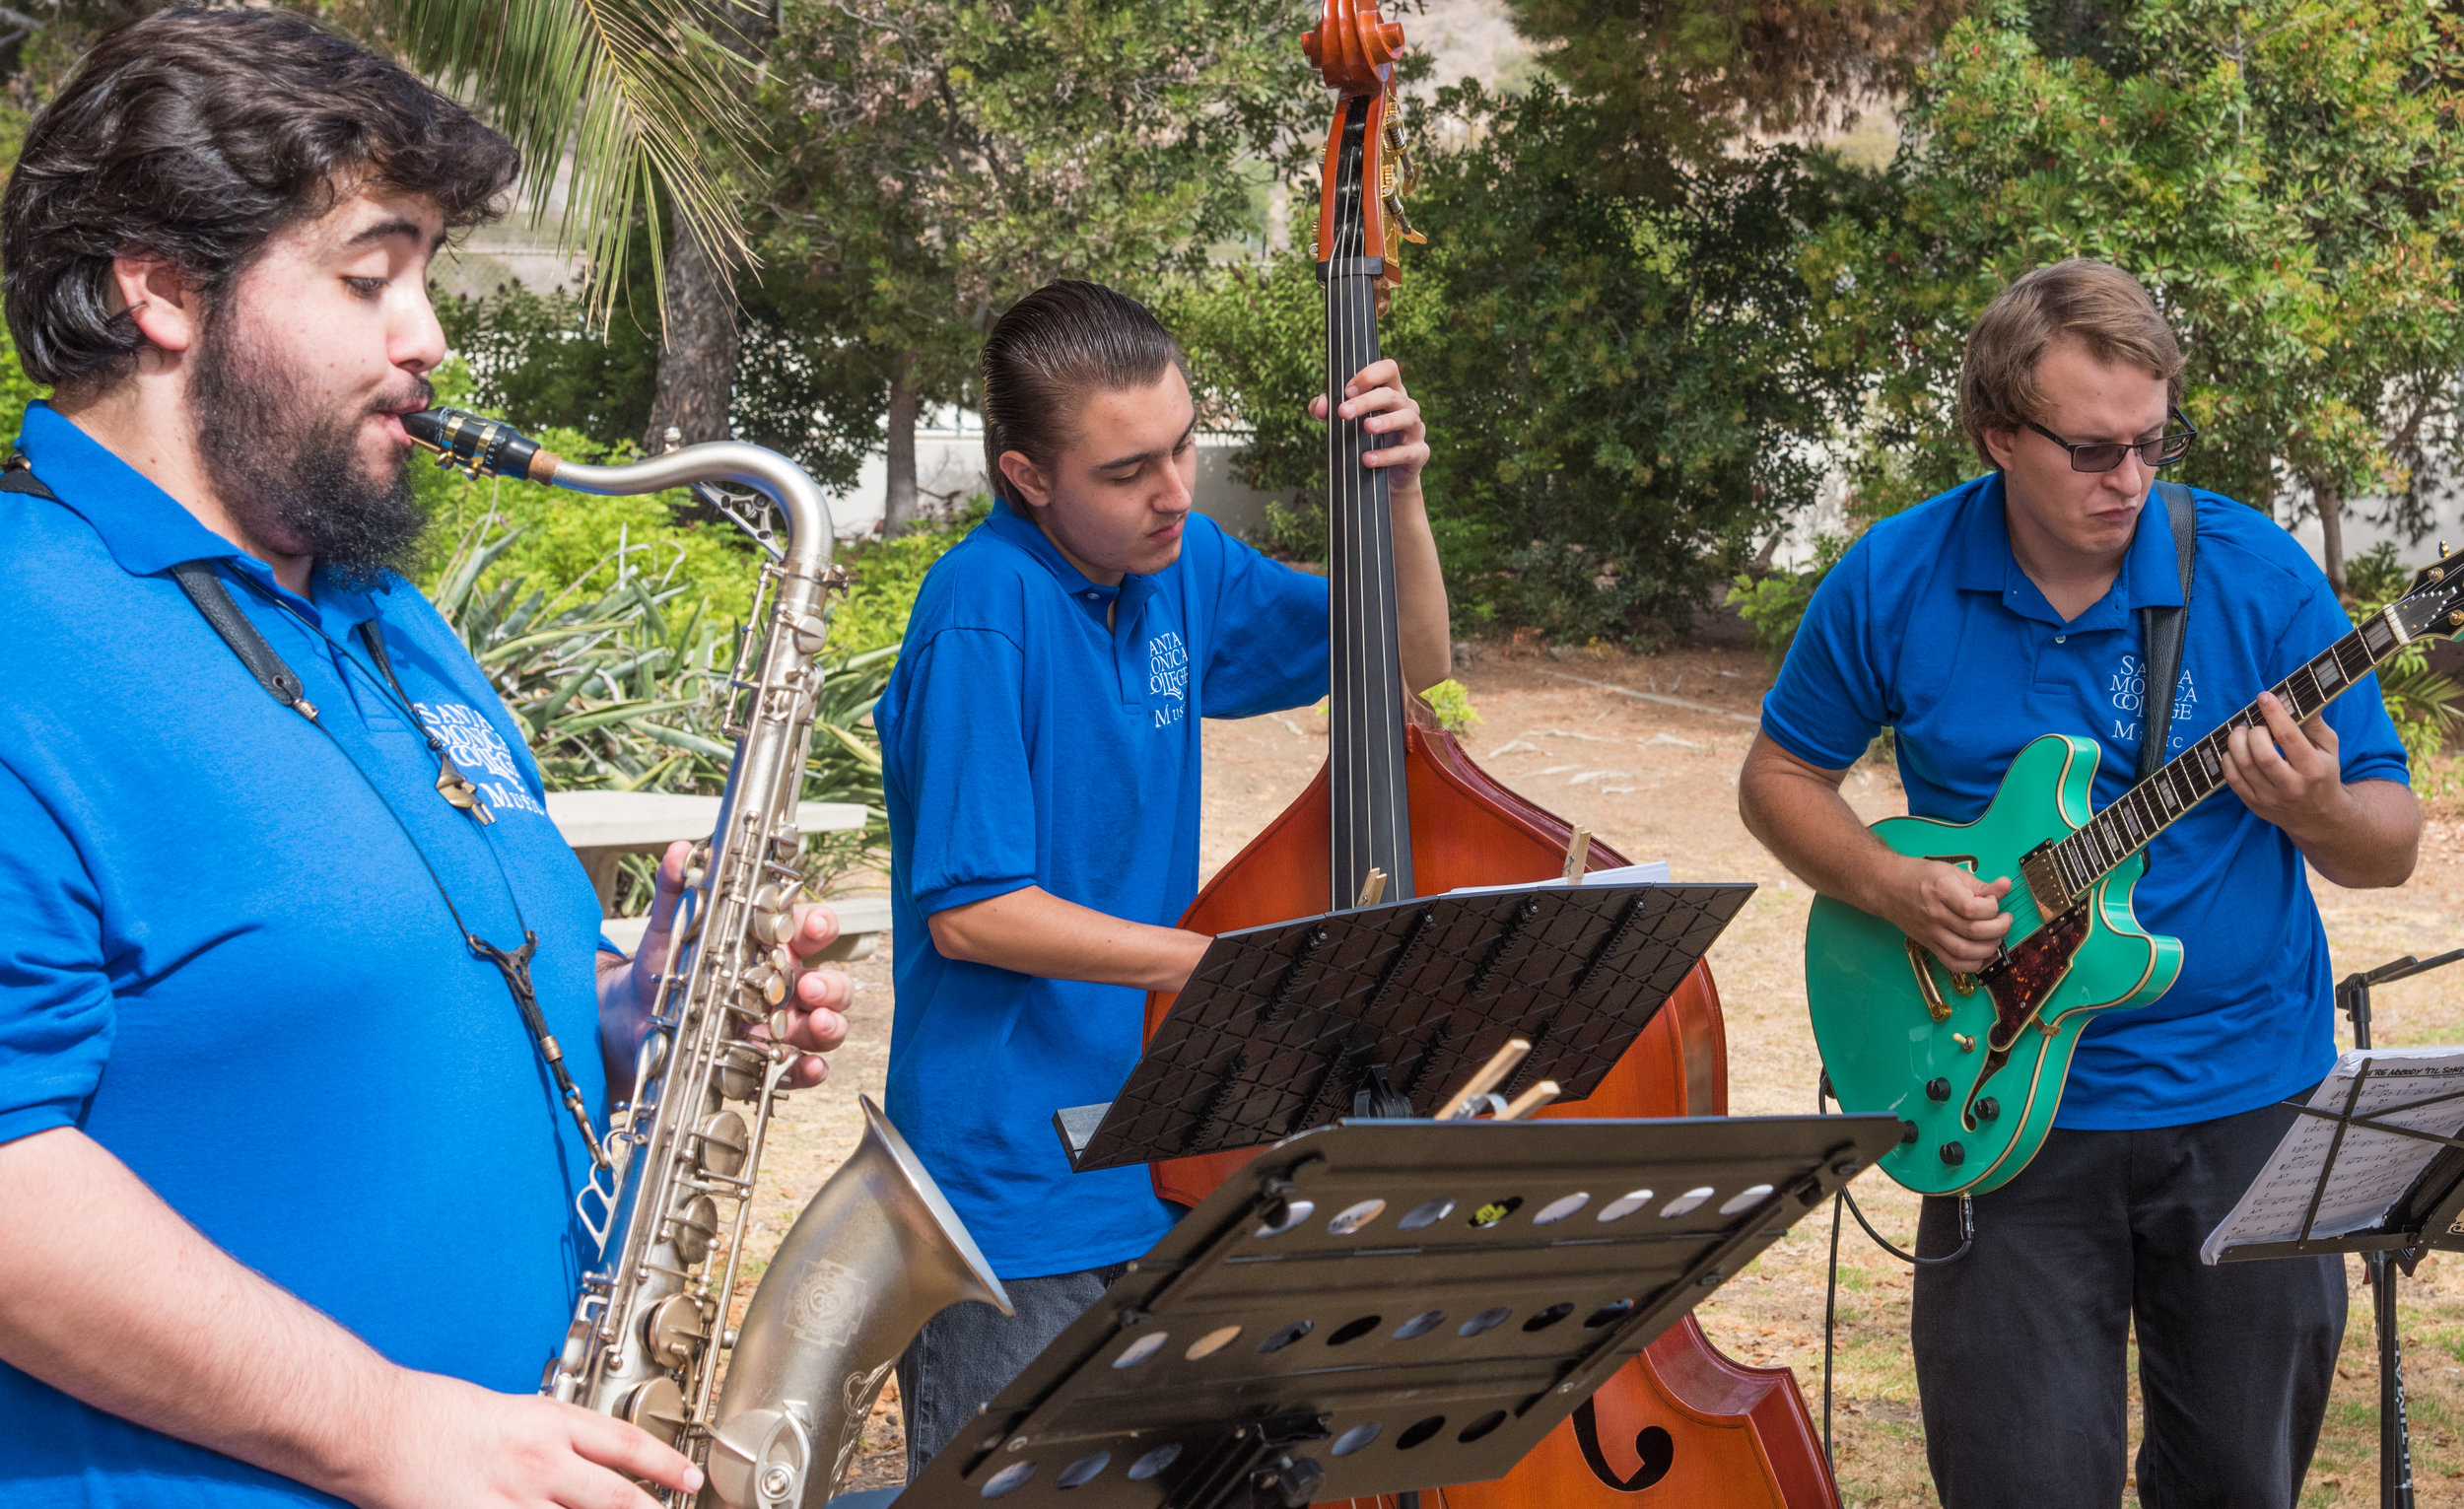  Christian Alva (left), Max Zwarych (center), and Malcom Fisher (right), jazz musicians from Santa Monica College's Applied Music program, perfrom shortly before the official ground breaking ceremony of the Santa Monica College Malibu Campus & Los An